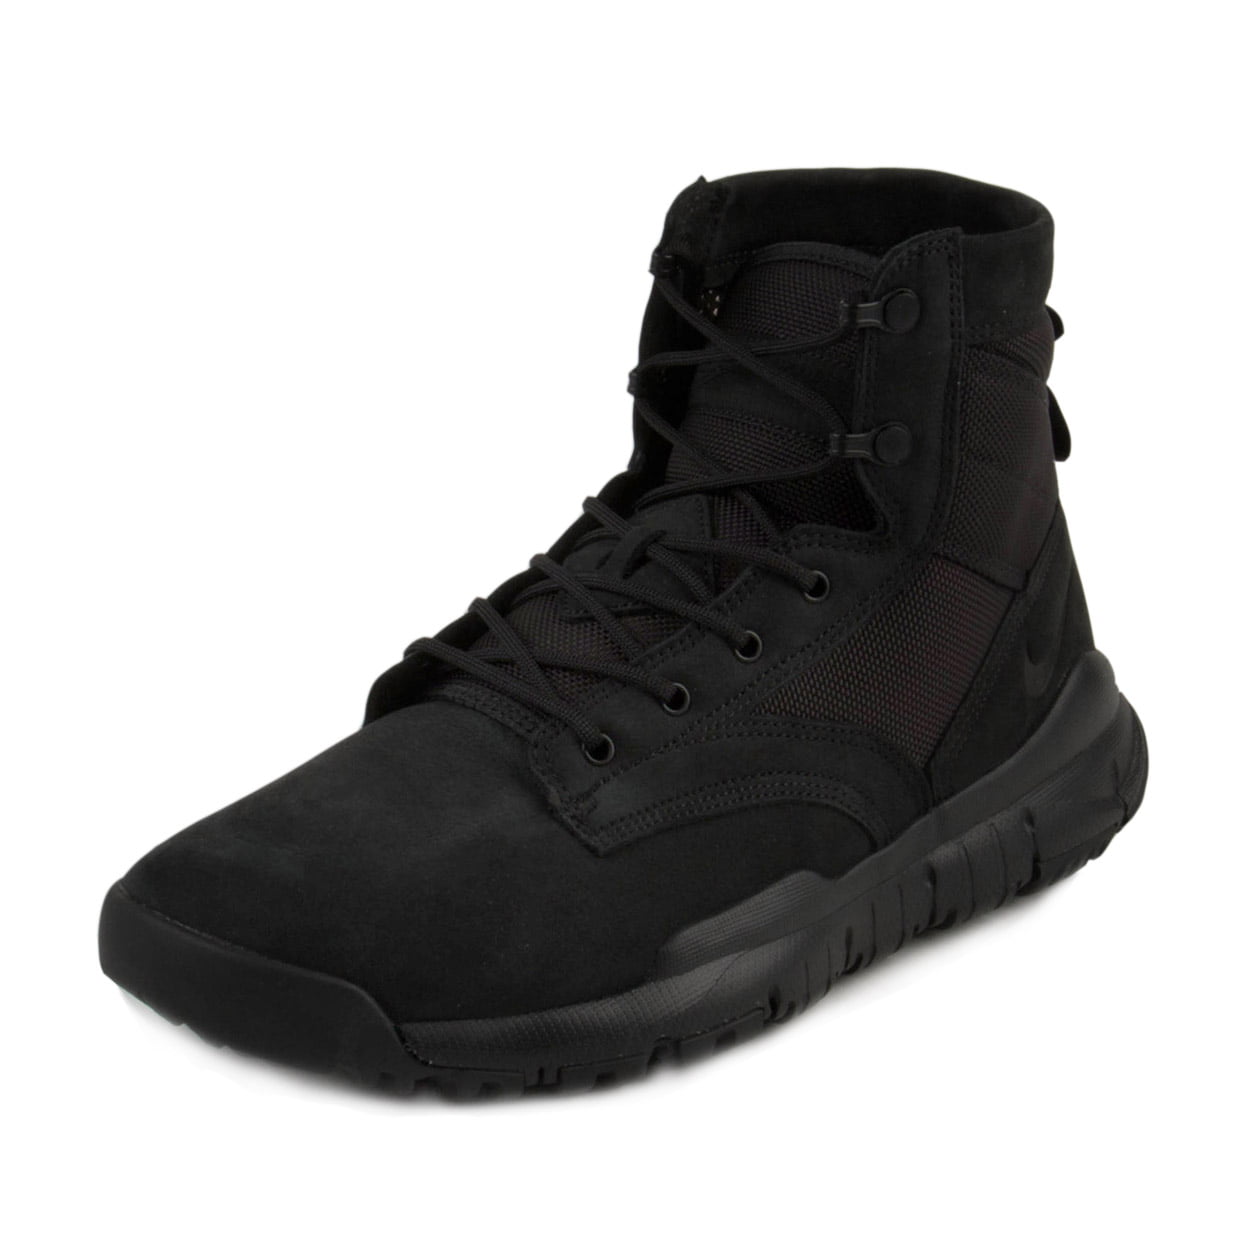 Nike Mens SFB 6" NSW Black Military Field Boot Special Forces 862507-001 - Walmart.com